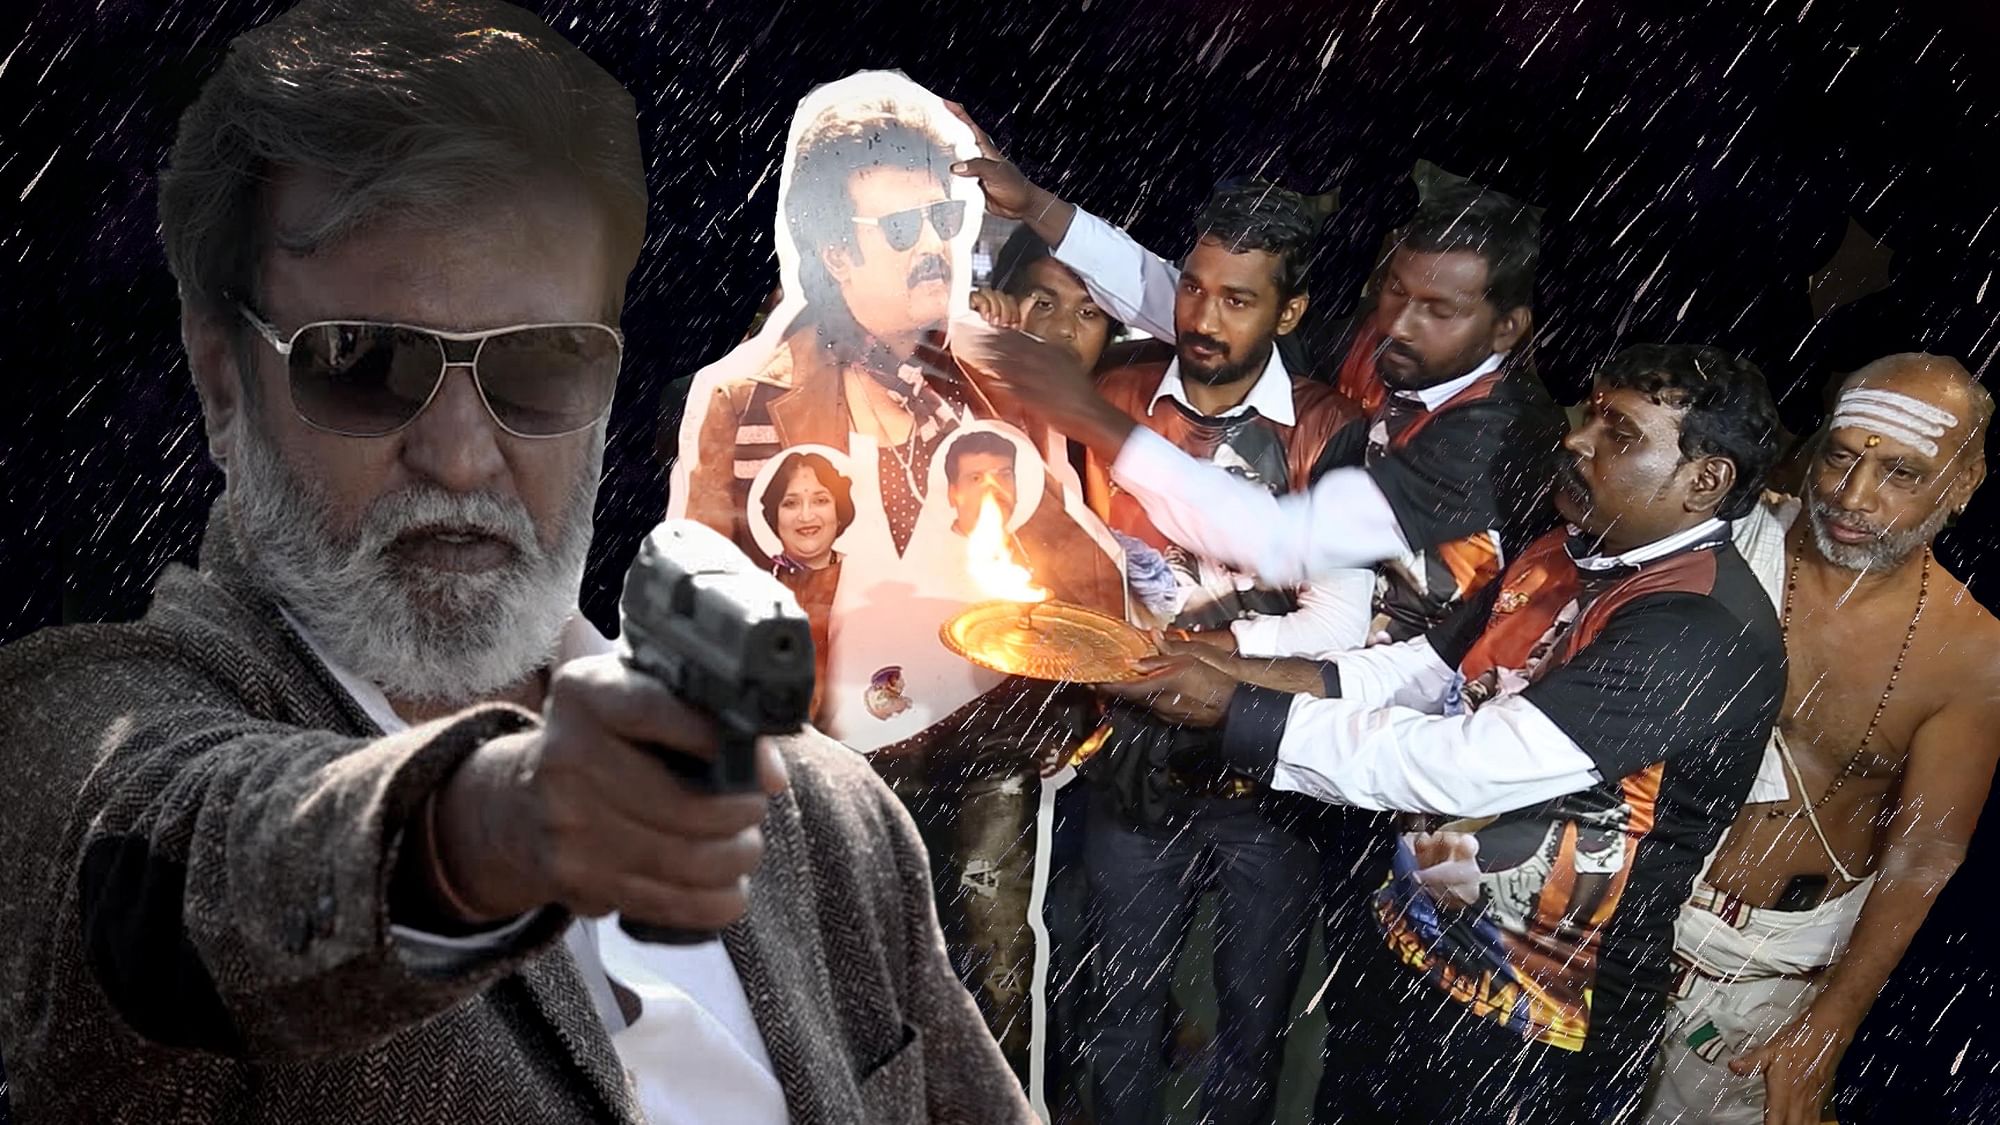 When Rajinikanth descended among his fans. (Photo: Altered by The Quint)